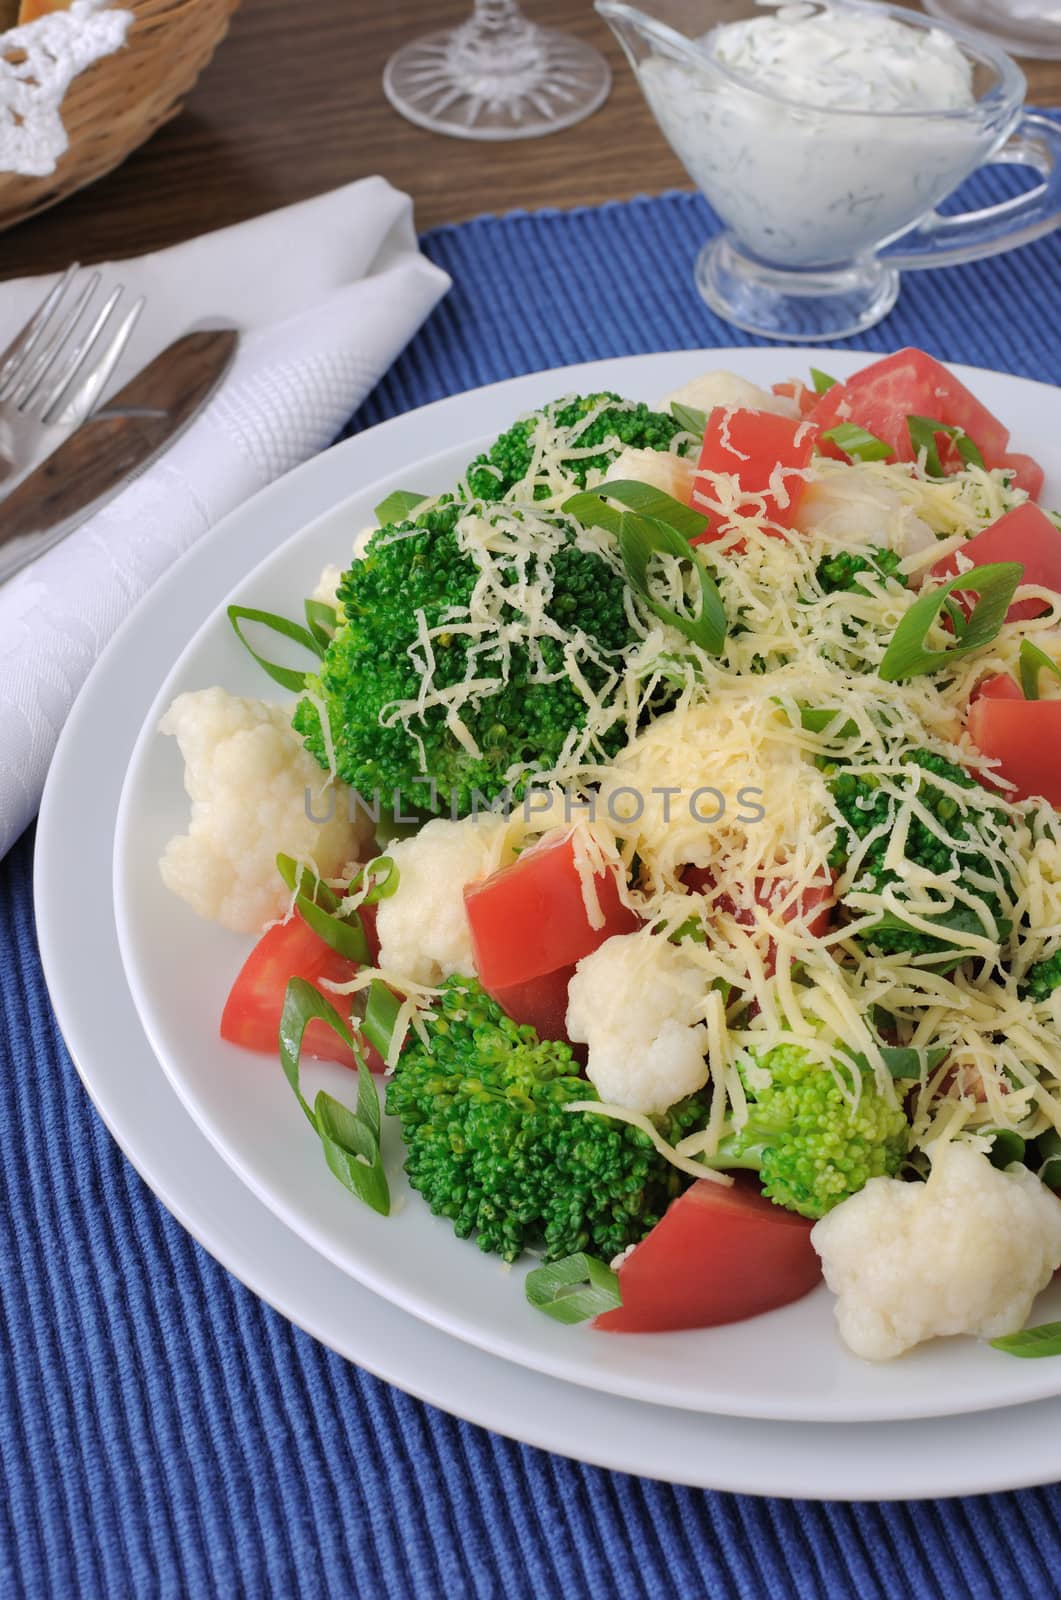 Salad of cauliflower and broccoli, tomatoes and cheese